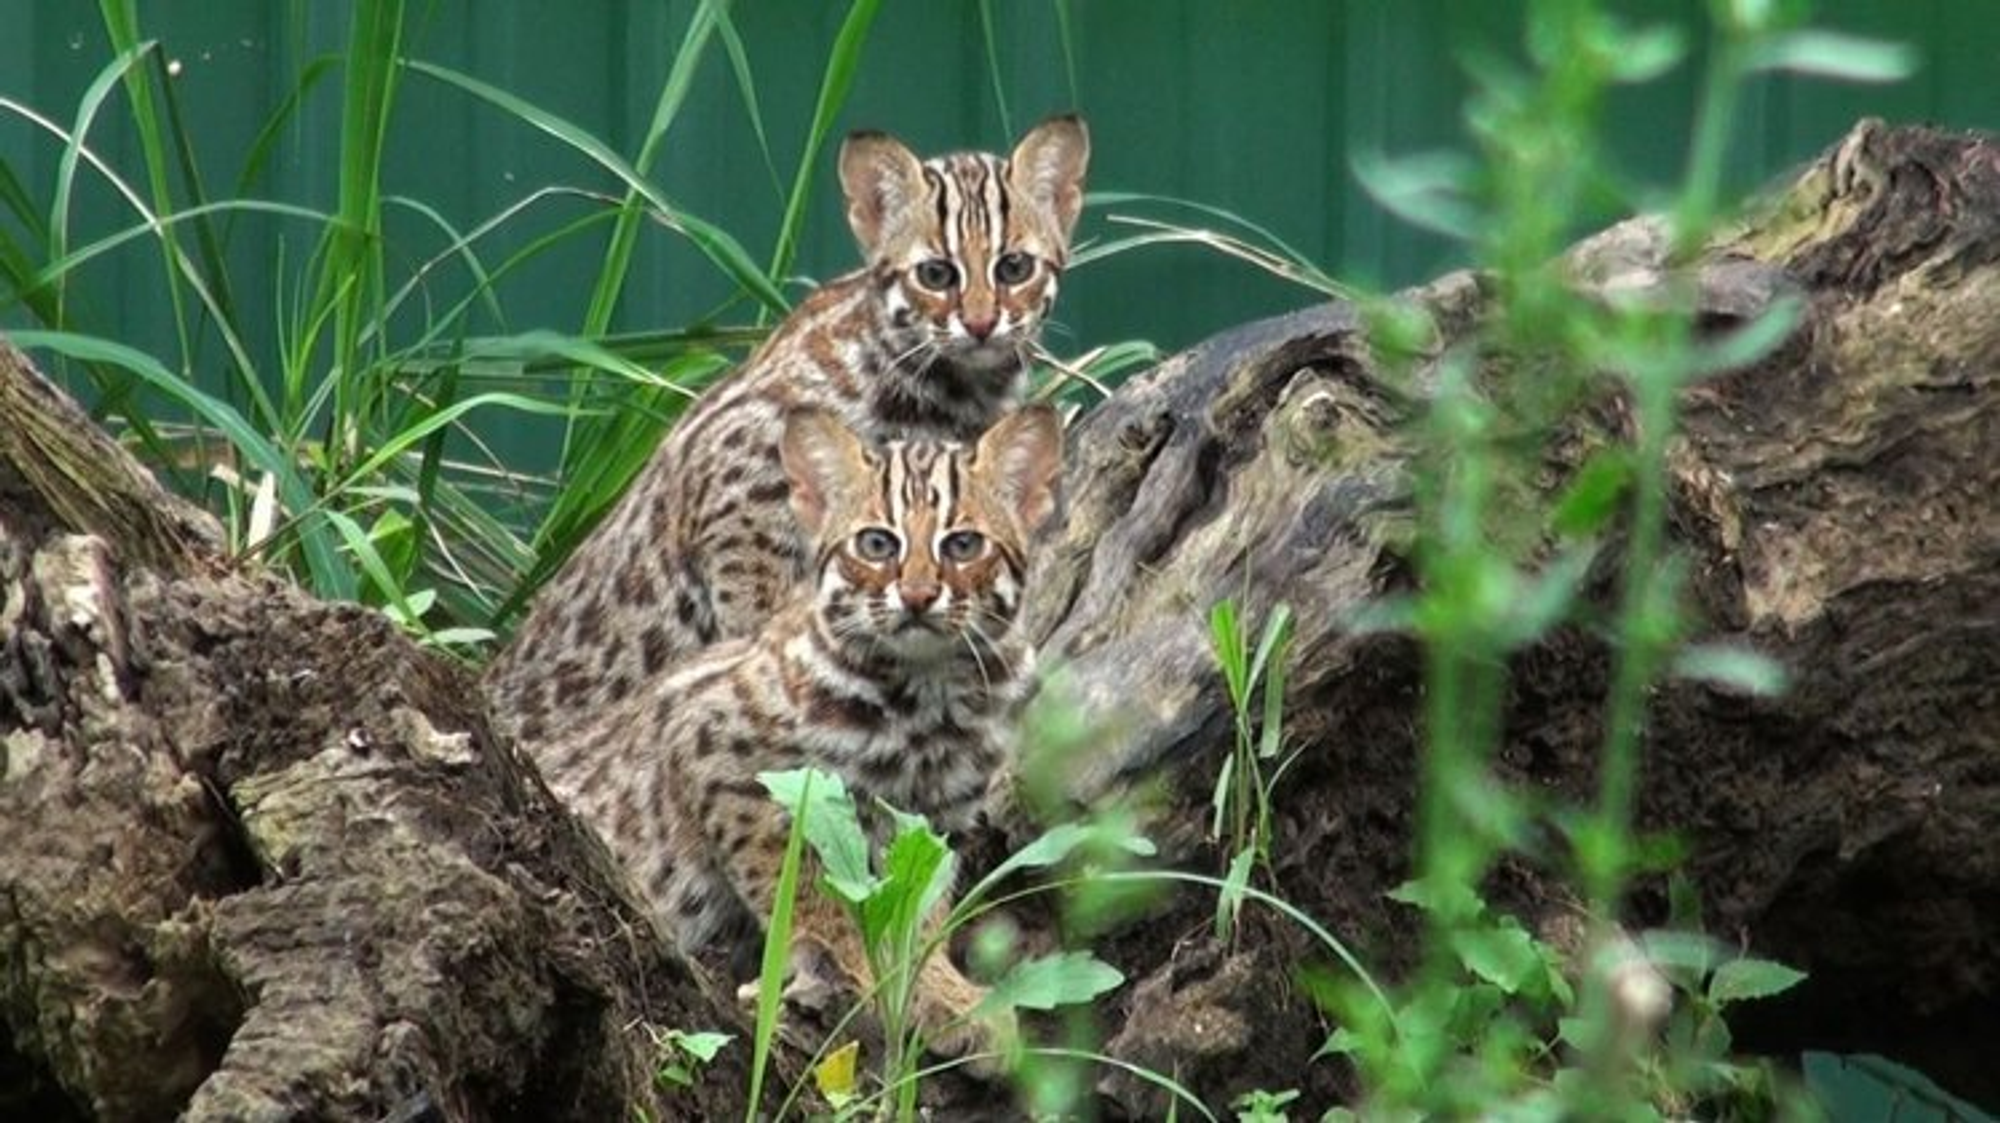 【Special Topic】Green Anniversary - Leopard Cat (in Chinese “shih hu”) Day in Taiwan